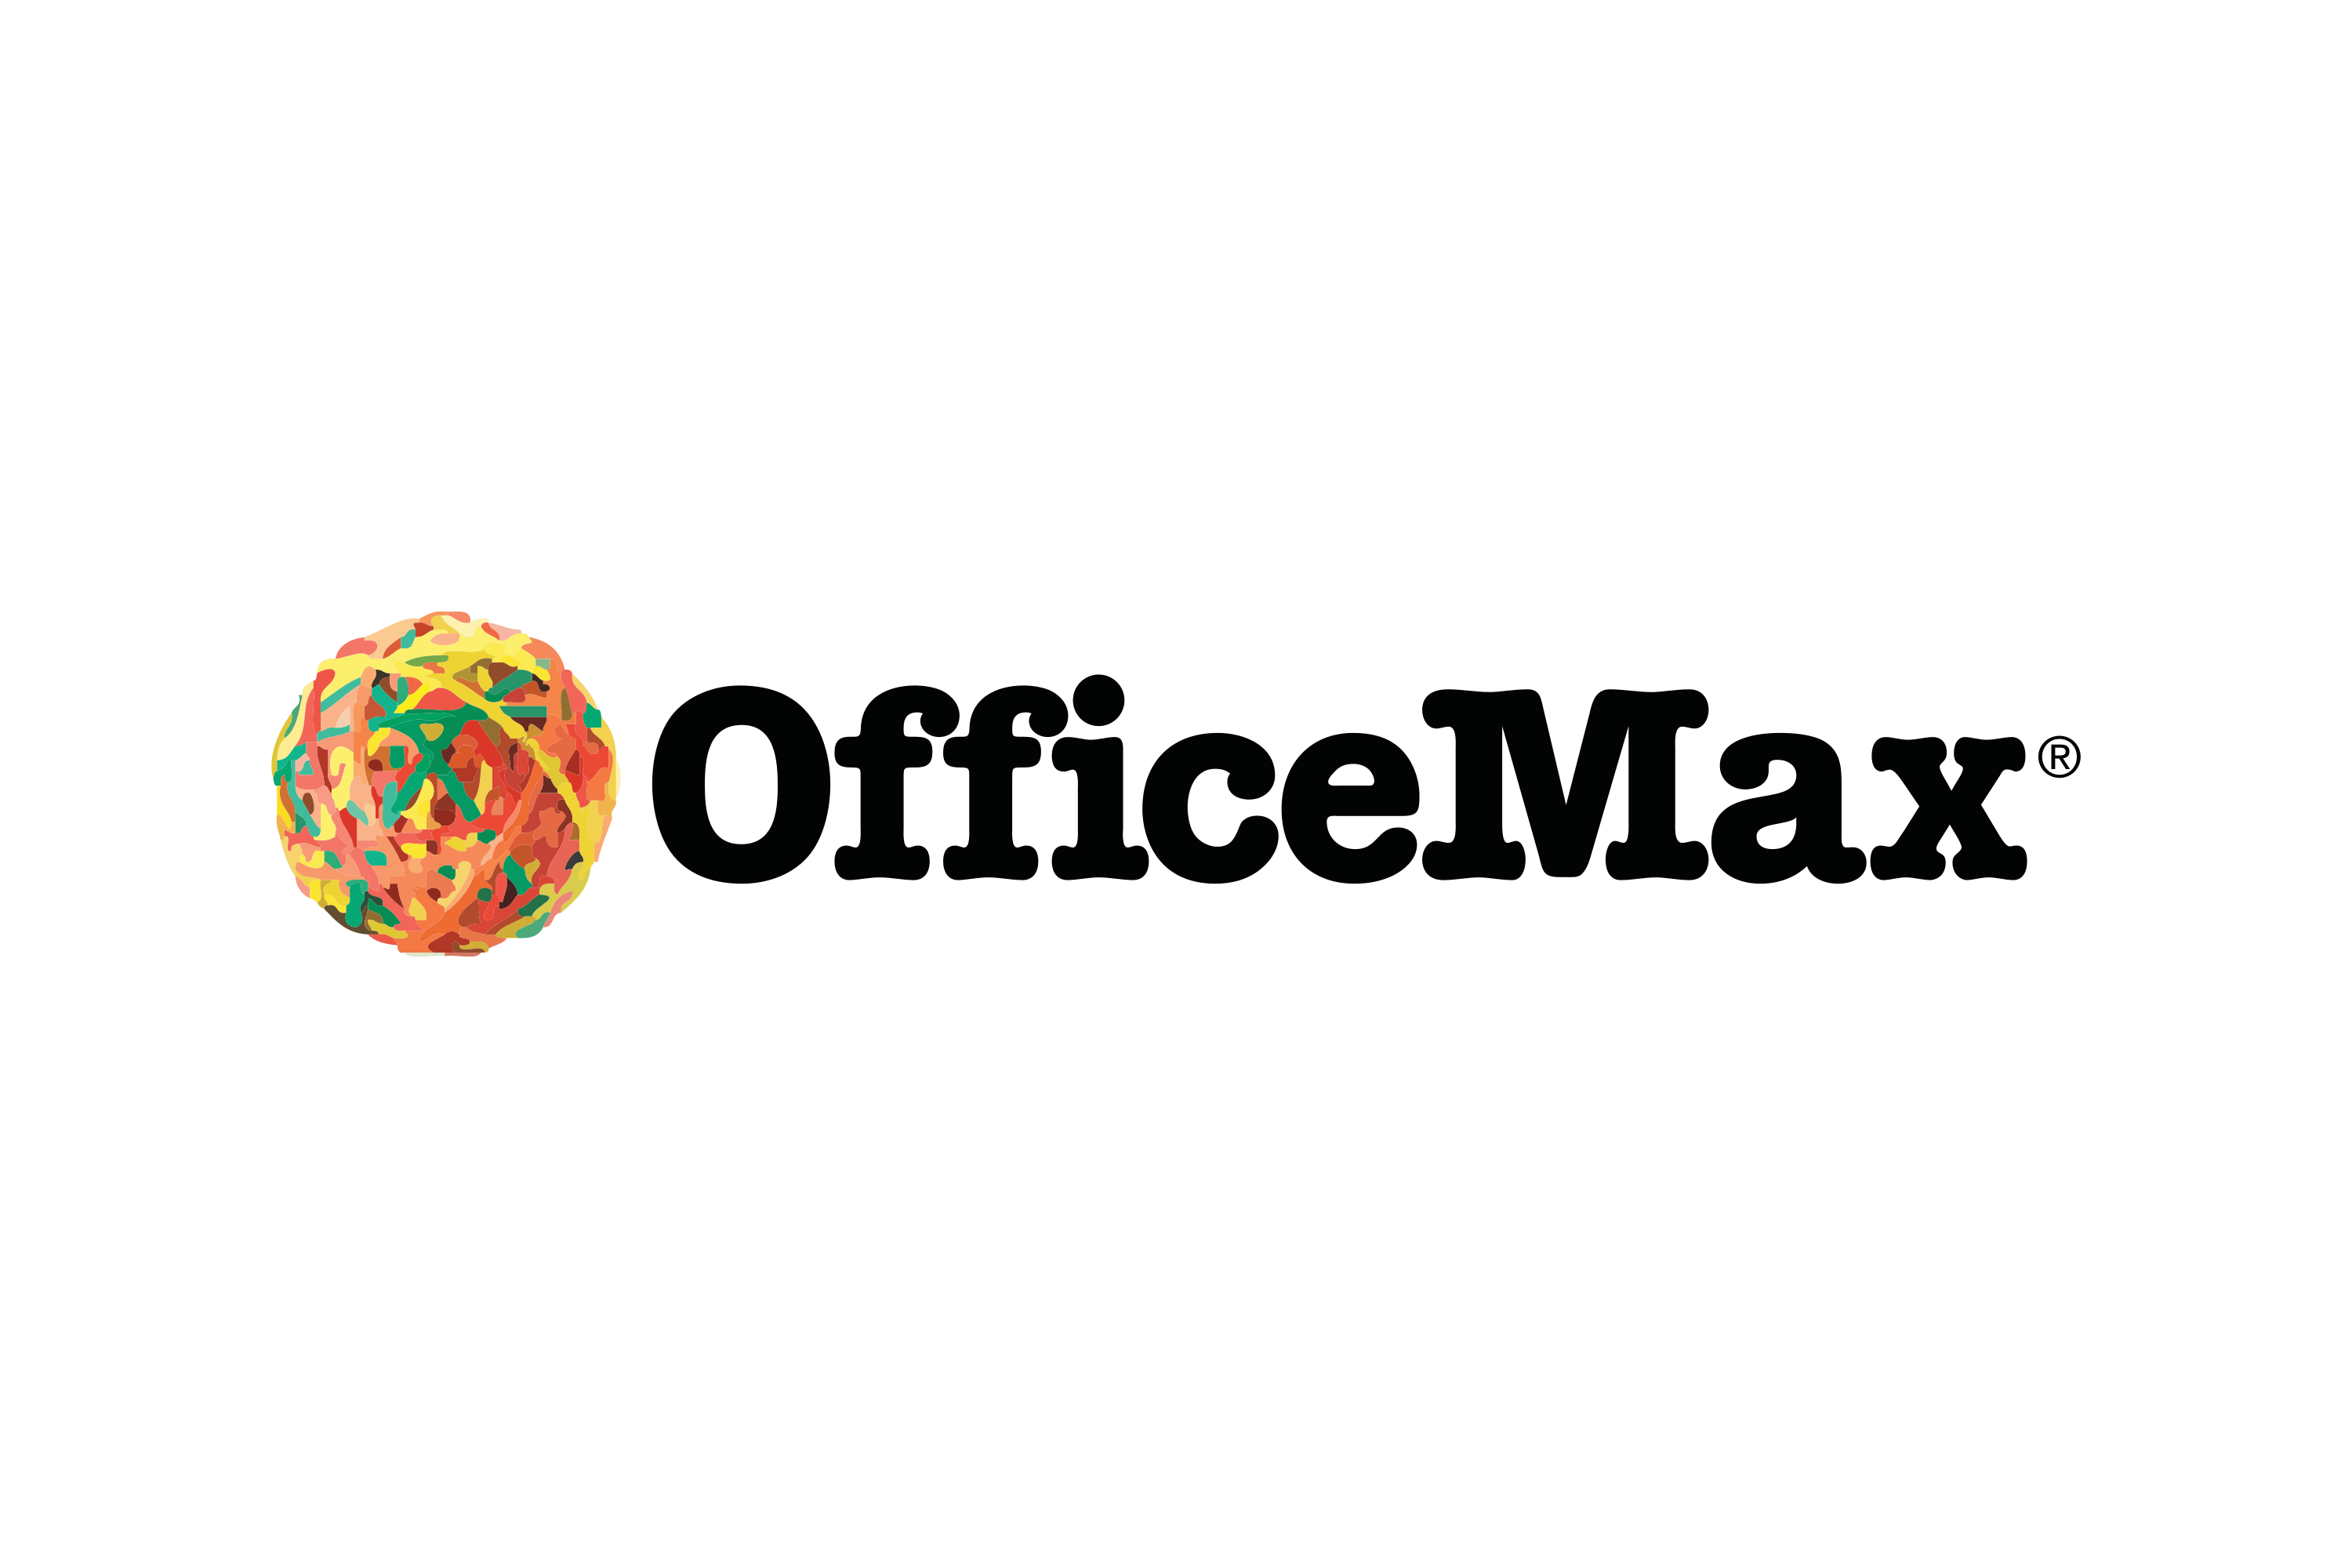 Download Download OfficeMax Logo in SVG Vector or PNG File Format ...